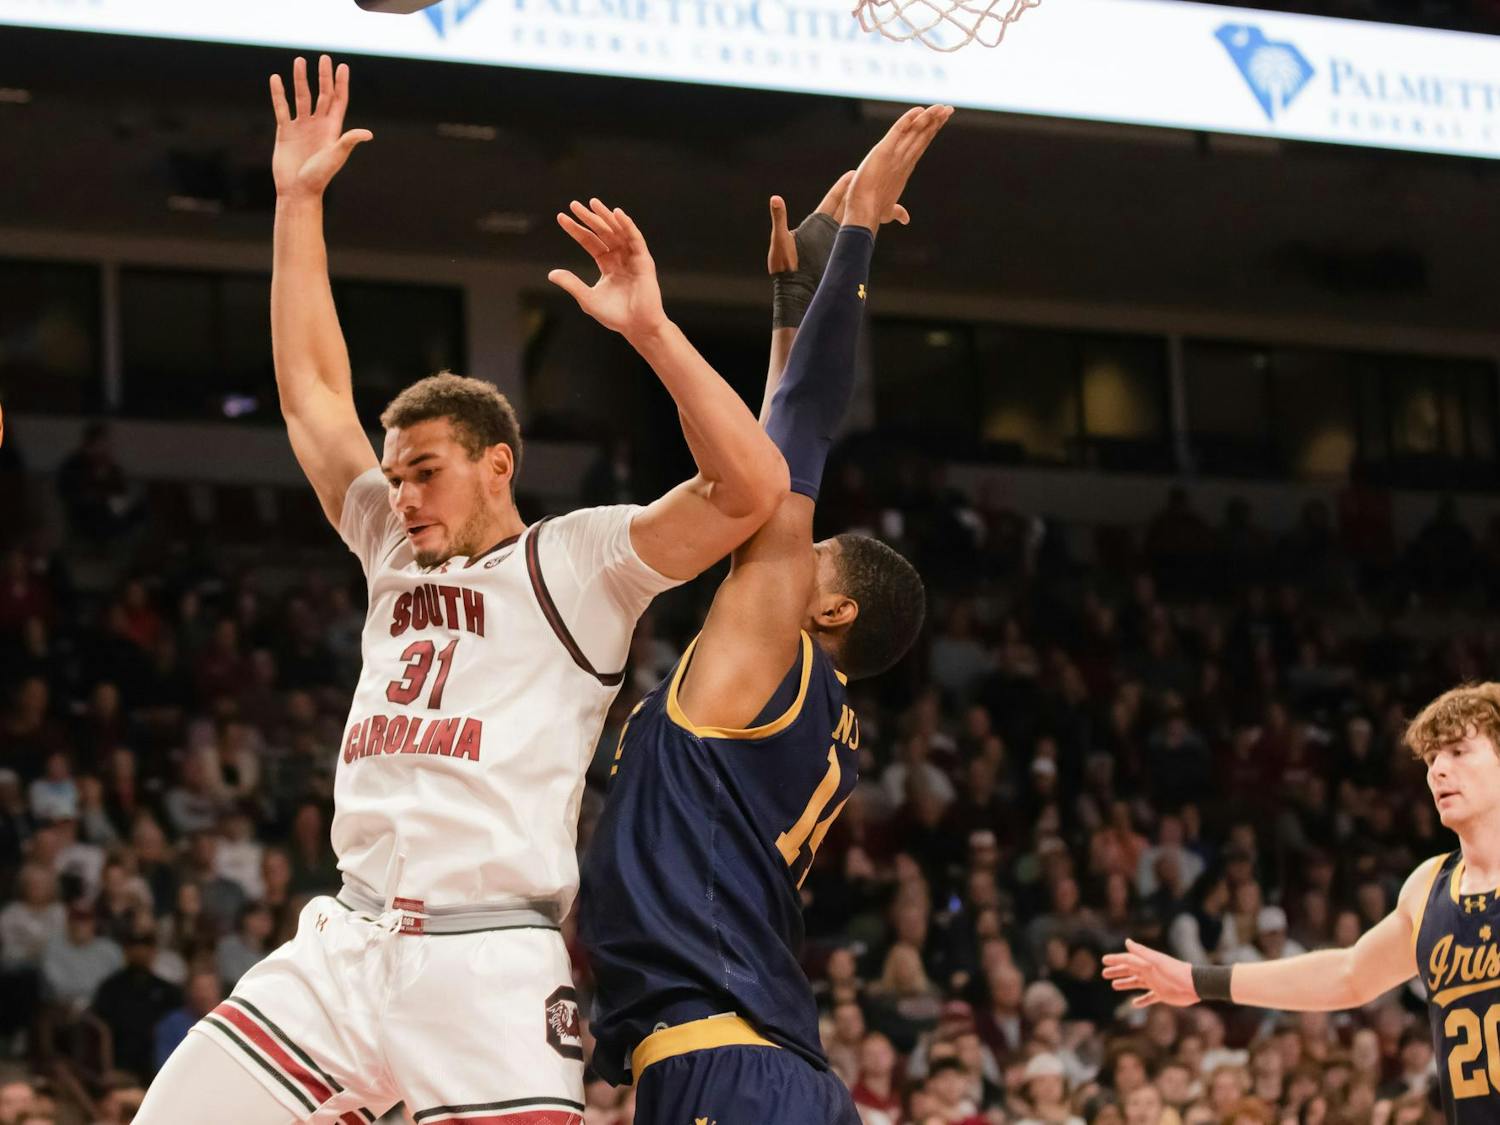 Redshirt senior forward Bejamin Bosmans-Verdonk collides at the net with a Notre Dame player during a game on Nov. 28, 2023. The Gamecocks beat the Fighting Irish 65-53.